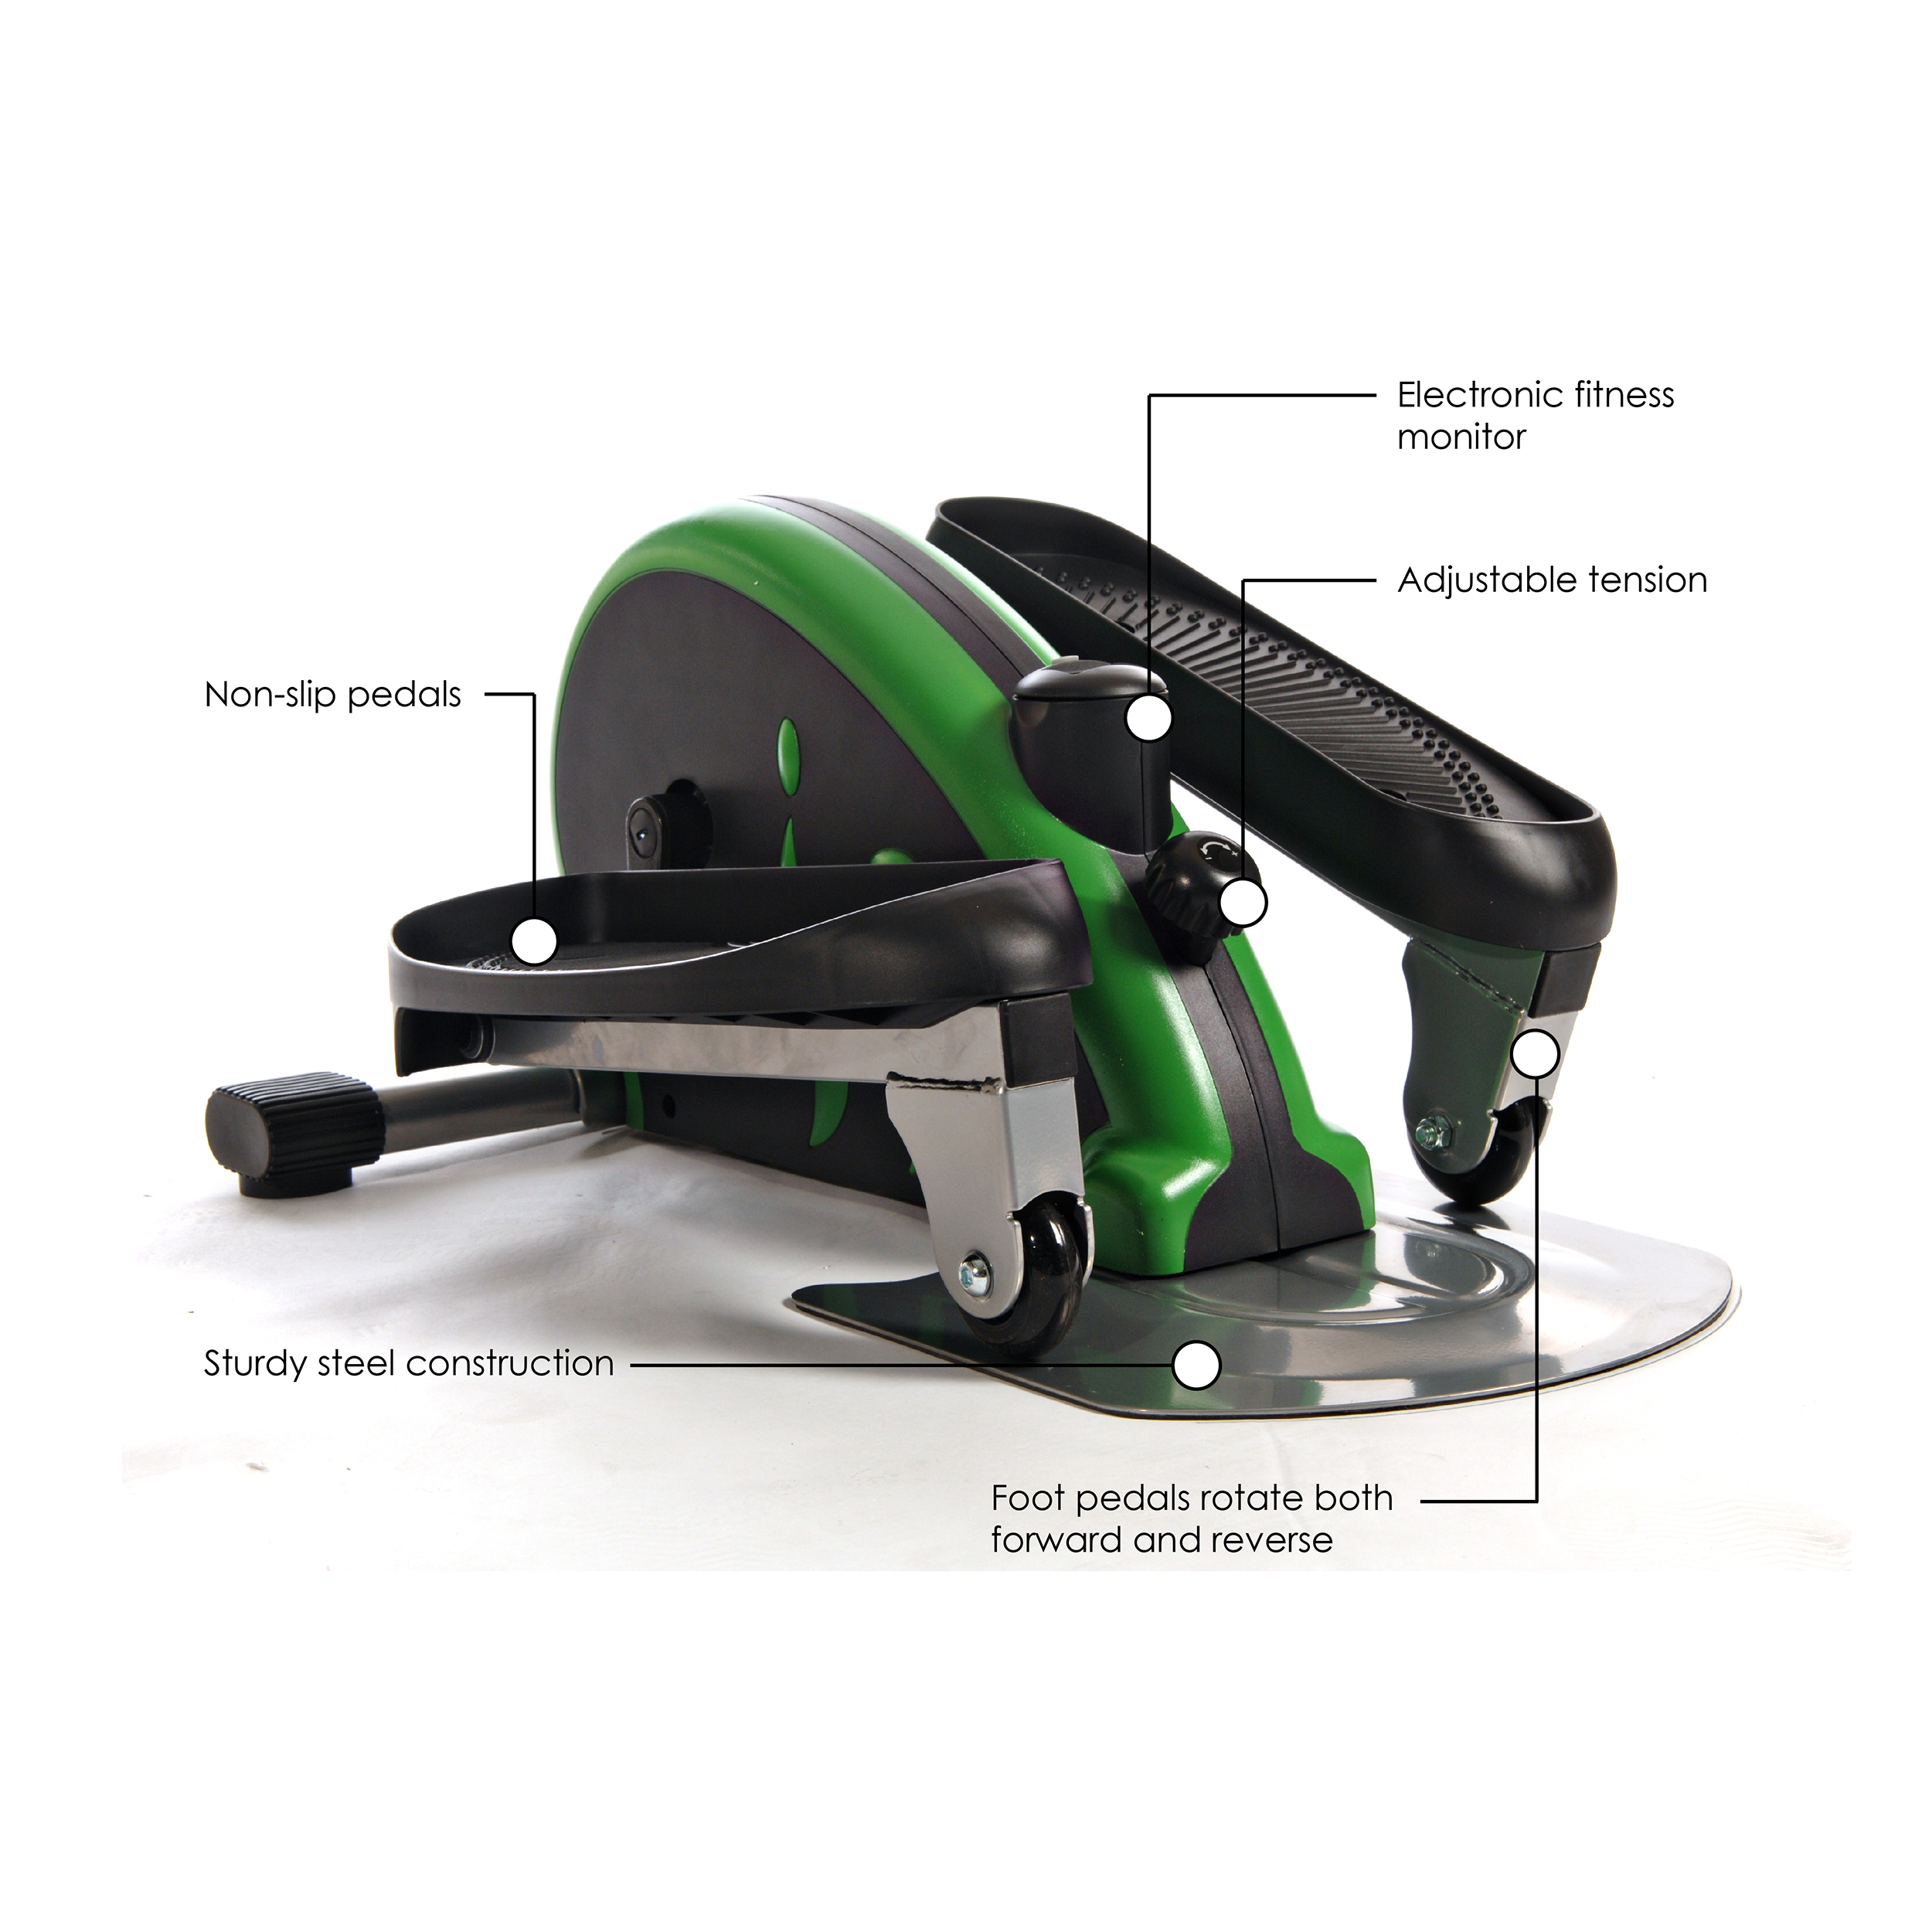 Stamina InMotion E-1000 Mini Elliptical Trainer, Adjustable Tension Resistance, 250 lb. Weight Limit, Green - image 2 of 5